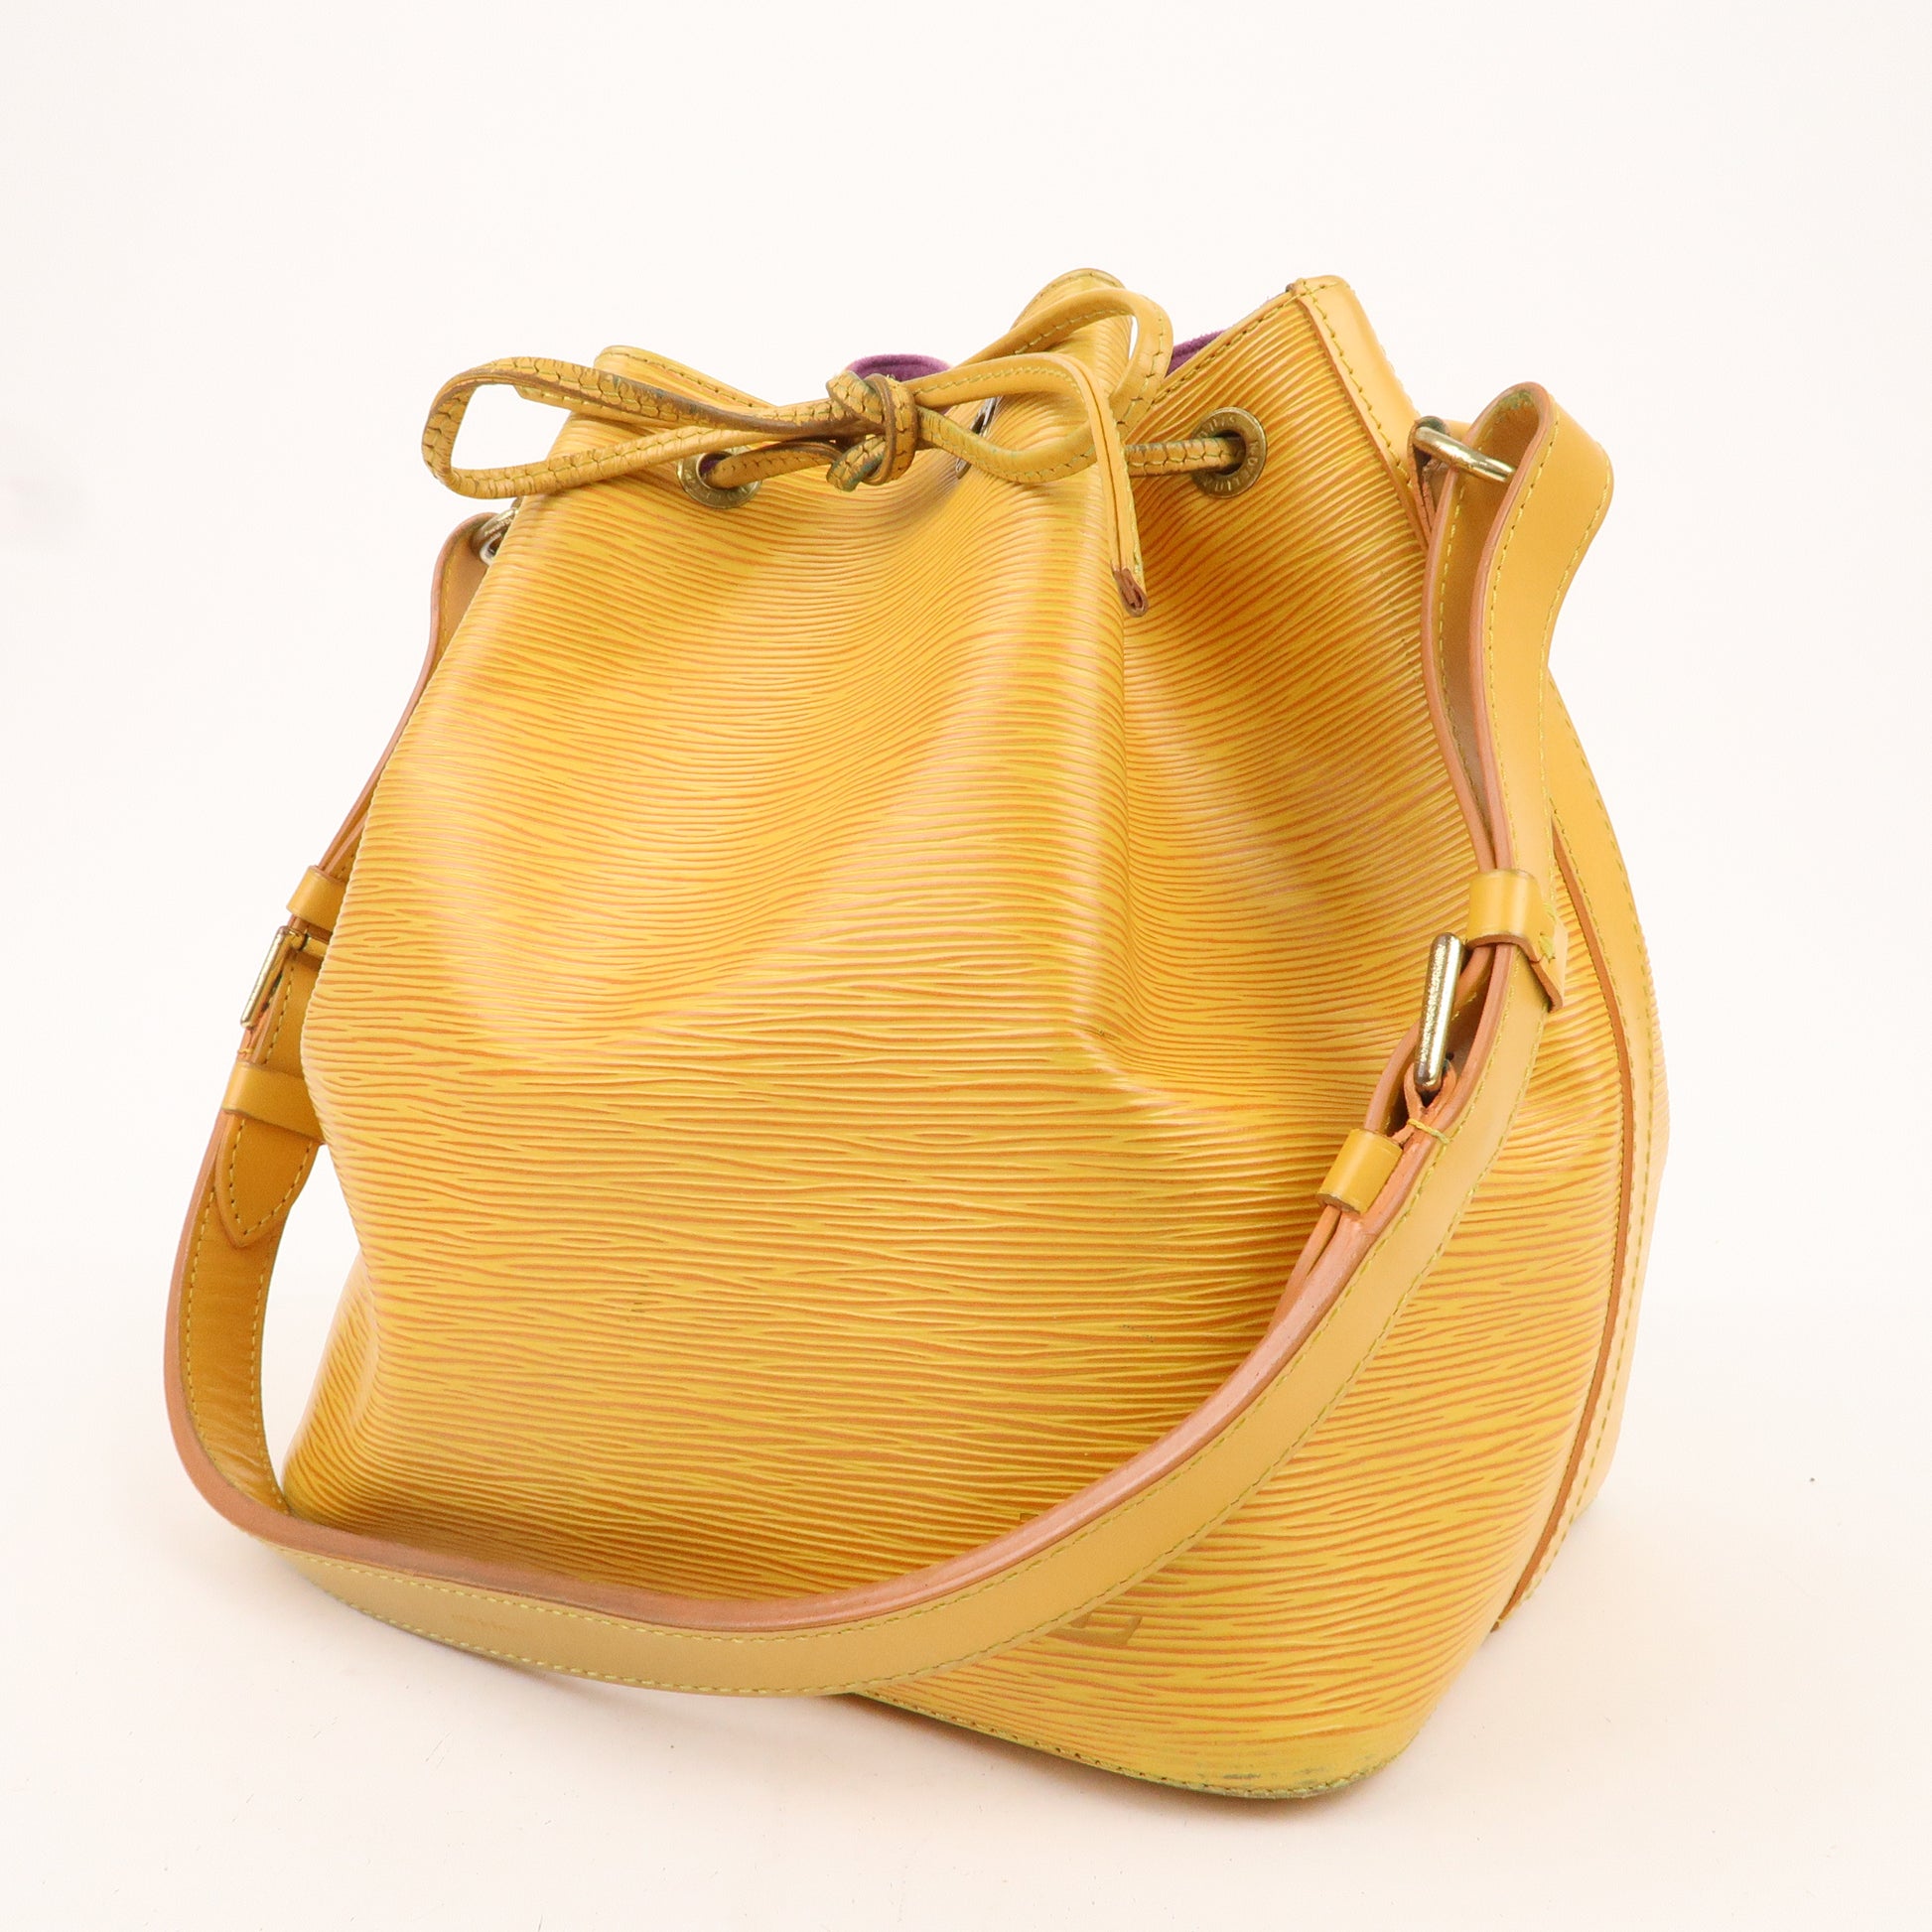 Orange and Yellow Luxury Cross Body Bag Straps Webbing With Gold